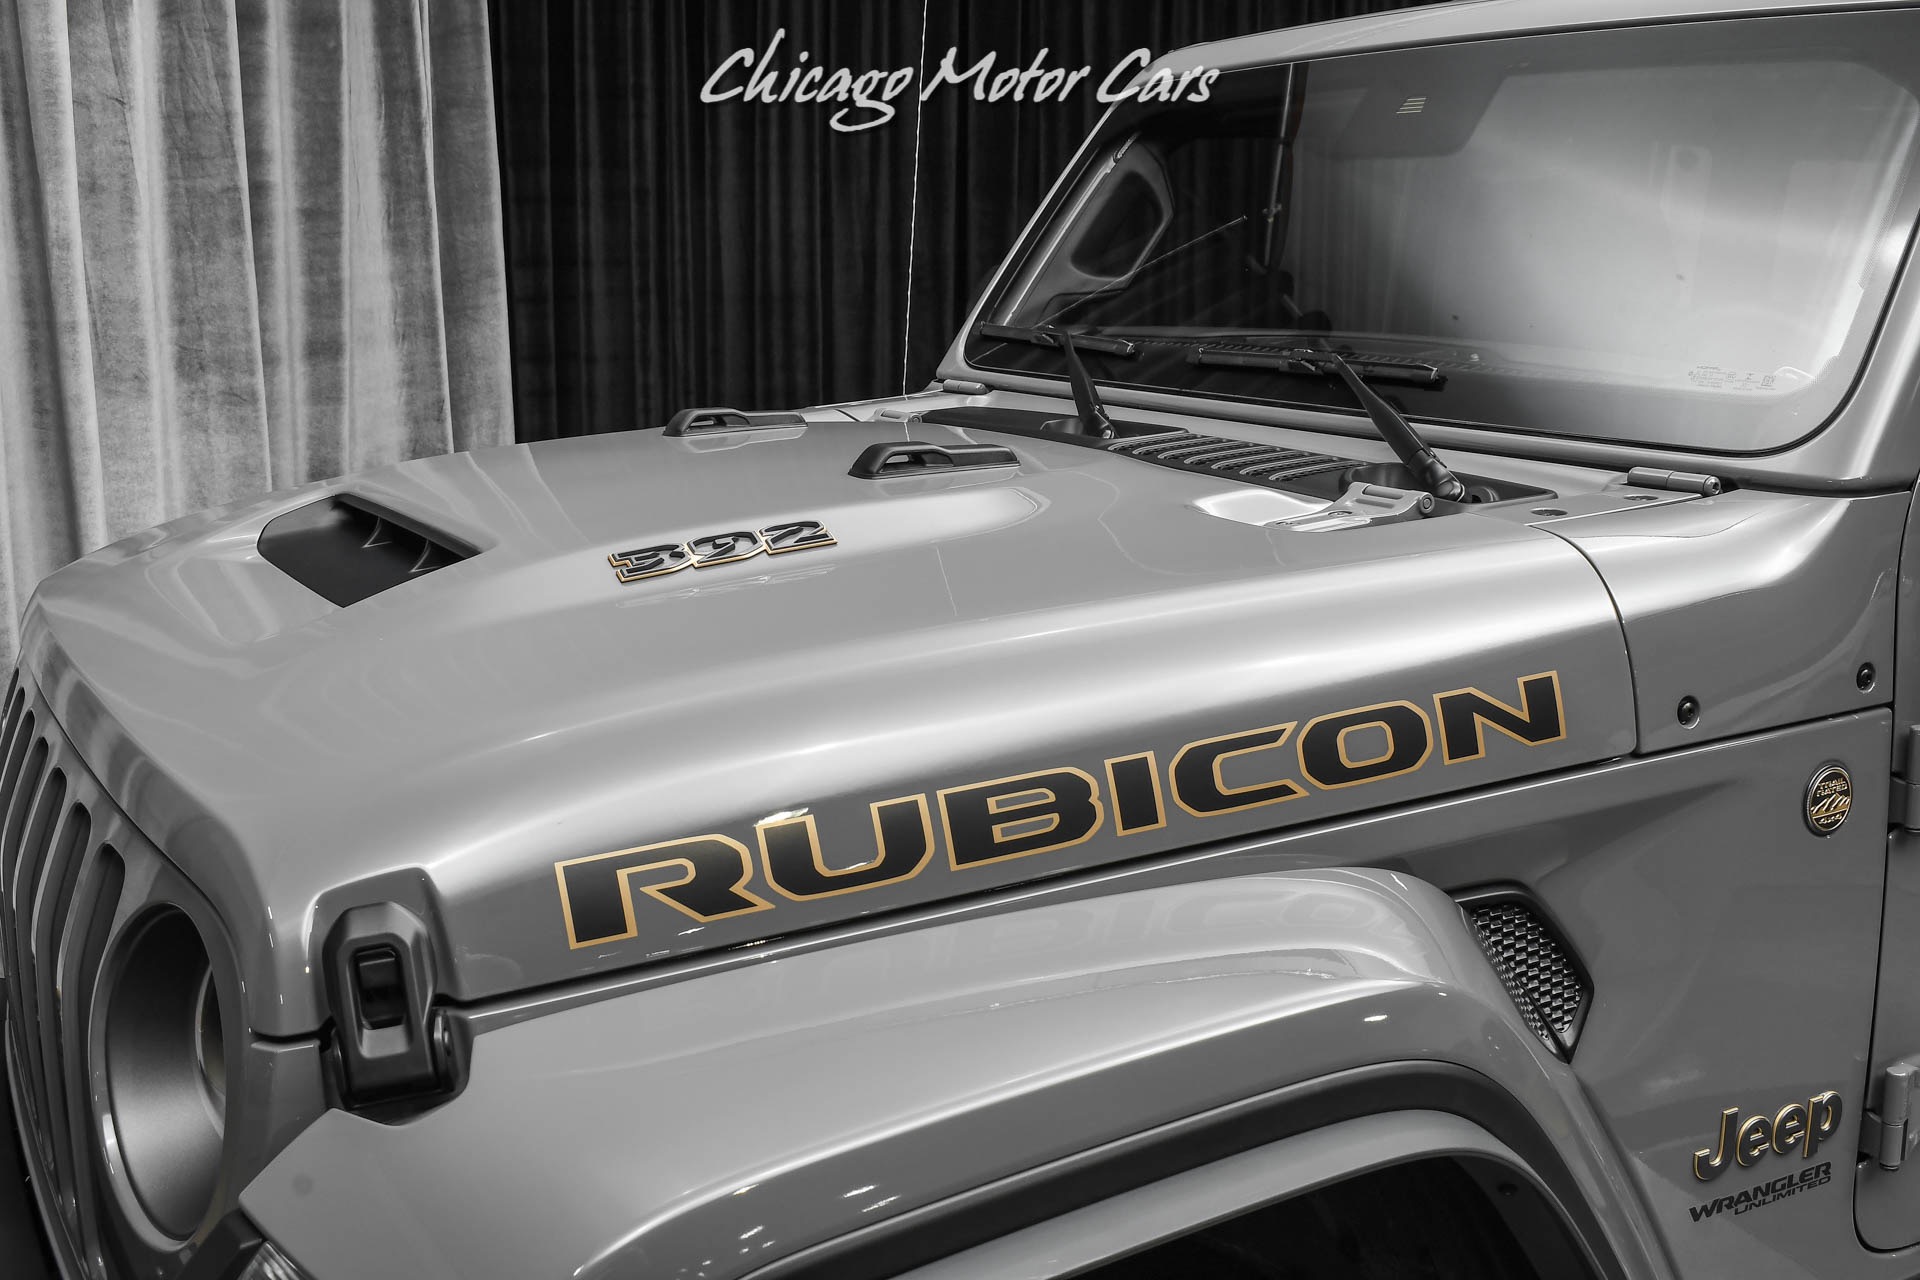 Used 2021 Jeep Wrangler Unlimited Rubicon 392 Xtreme Recon Package Sting  Gray Hemi V8 470HP For Sale (Special Pricing) | Chicago Motor Cars Stock  #19430